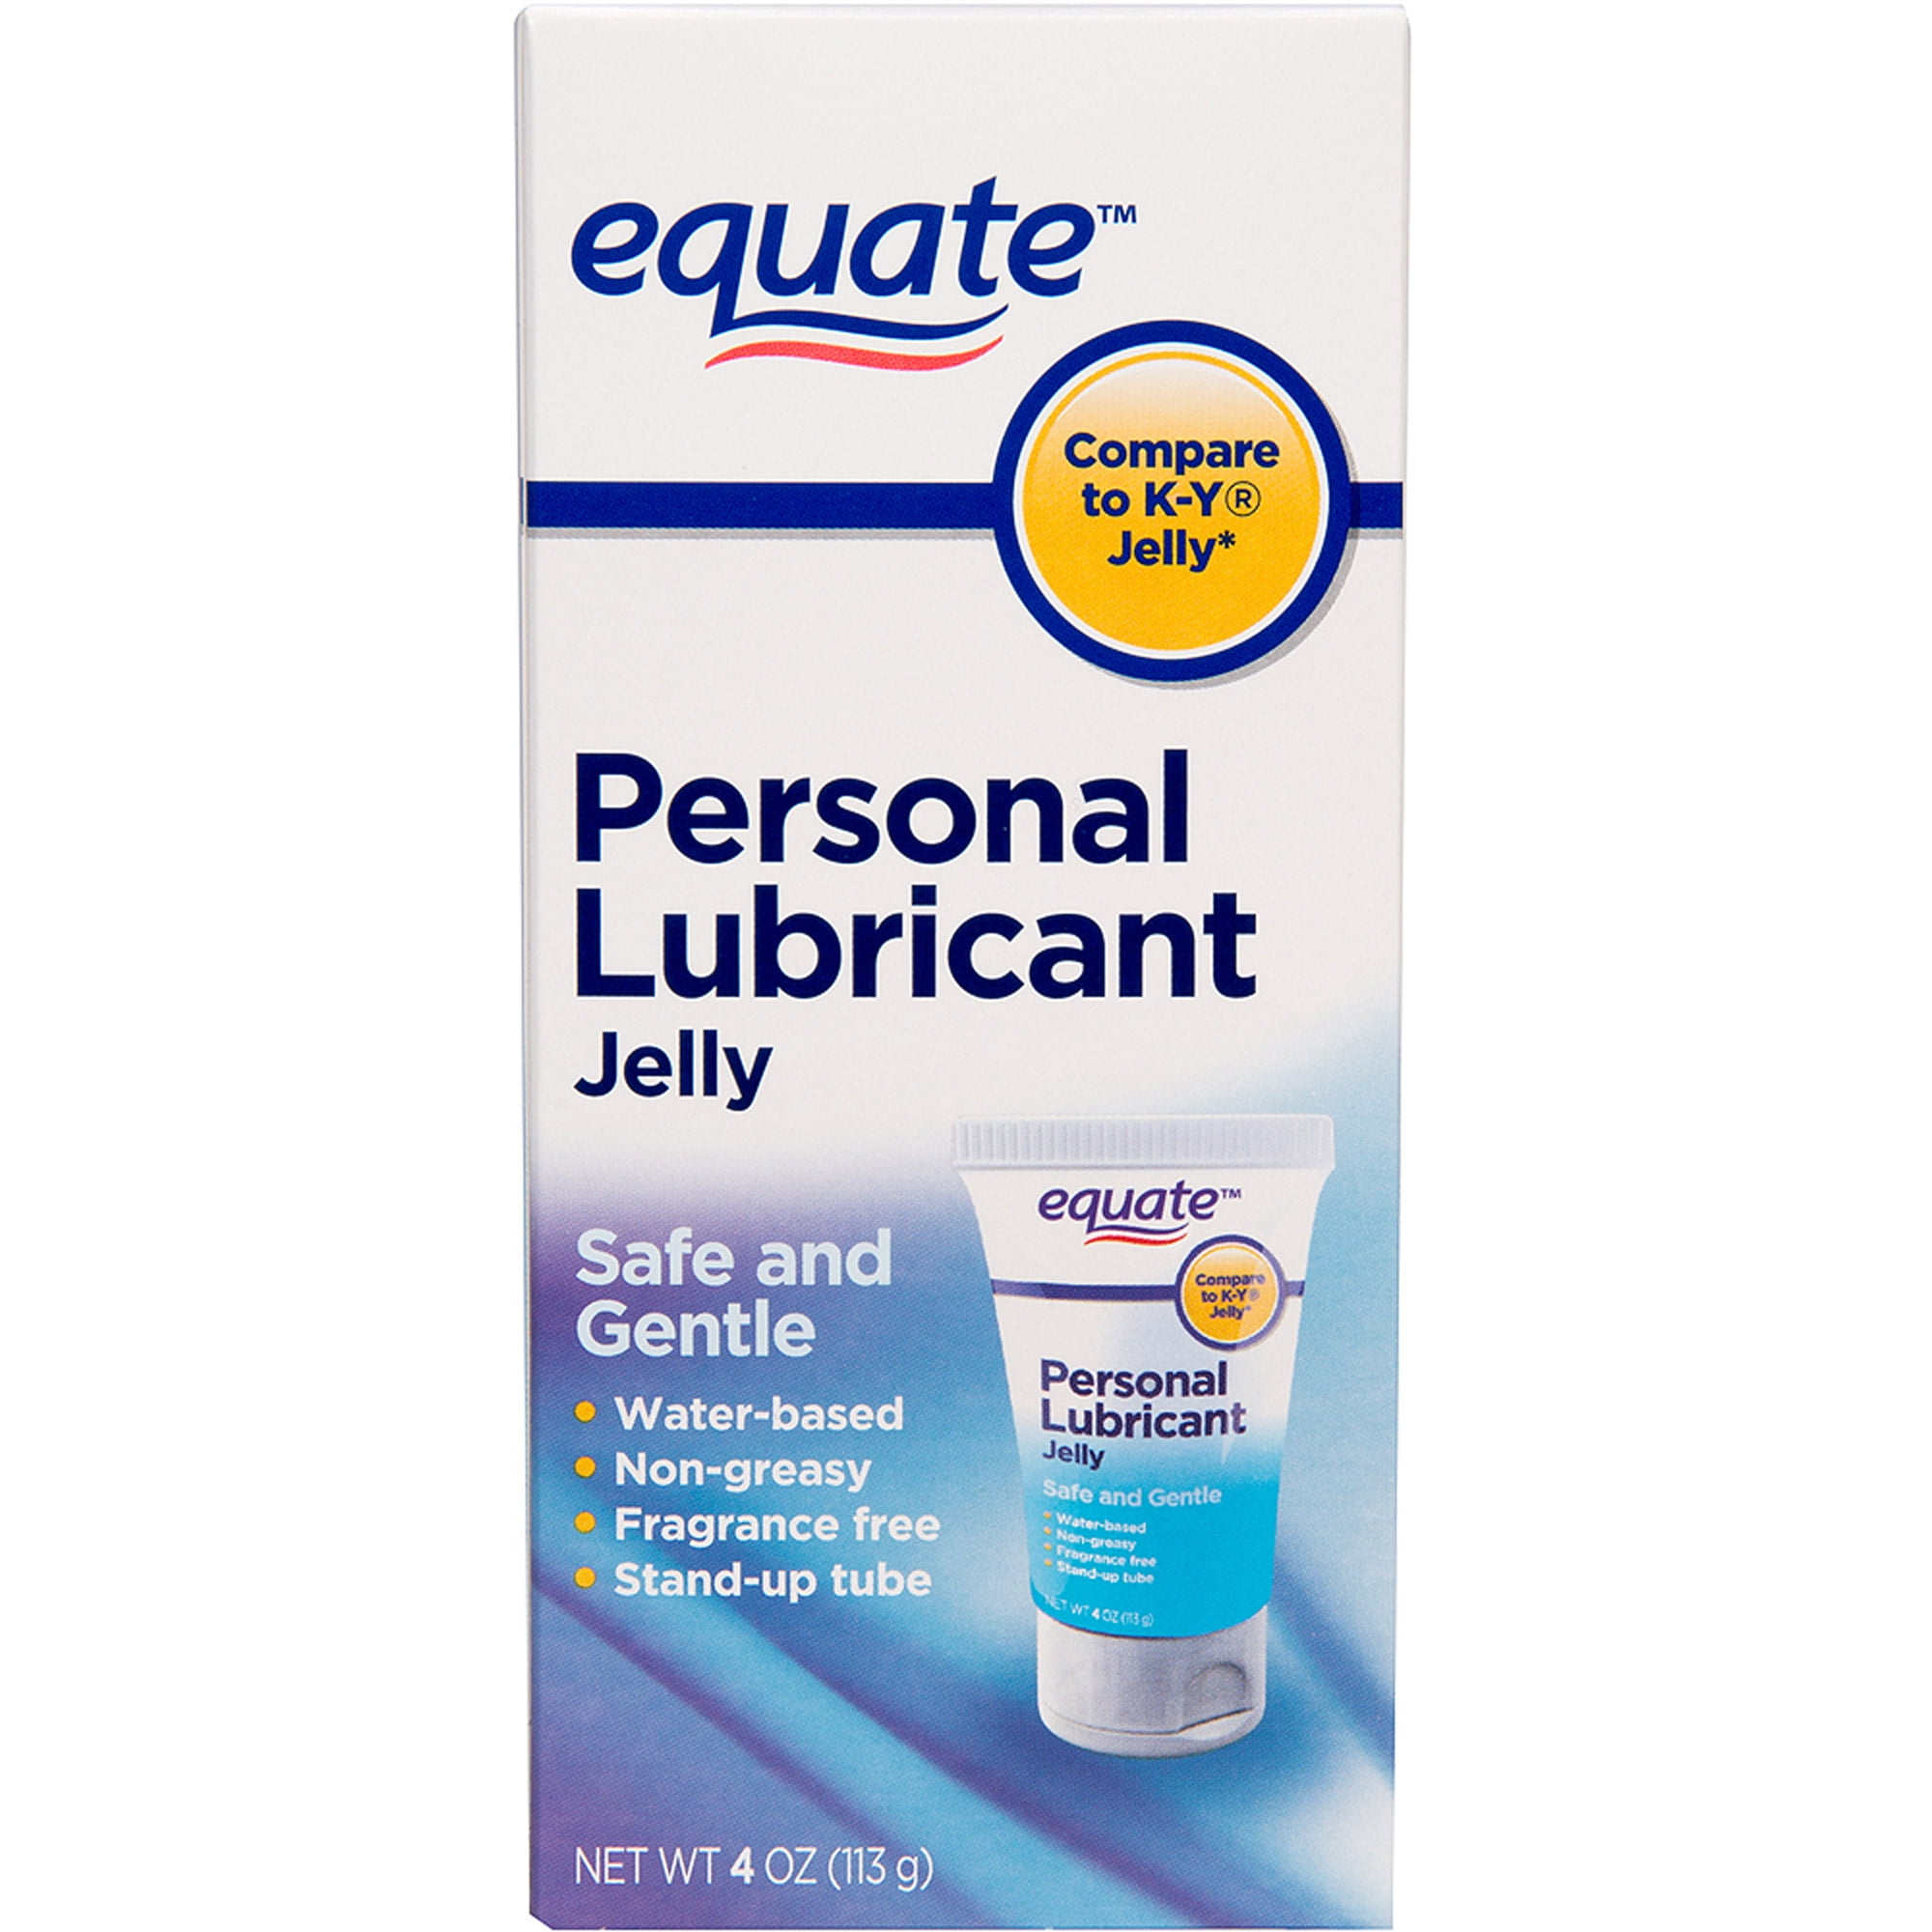 What can you use as a safe and natural personal lubricant?